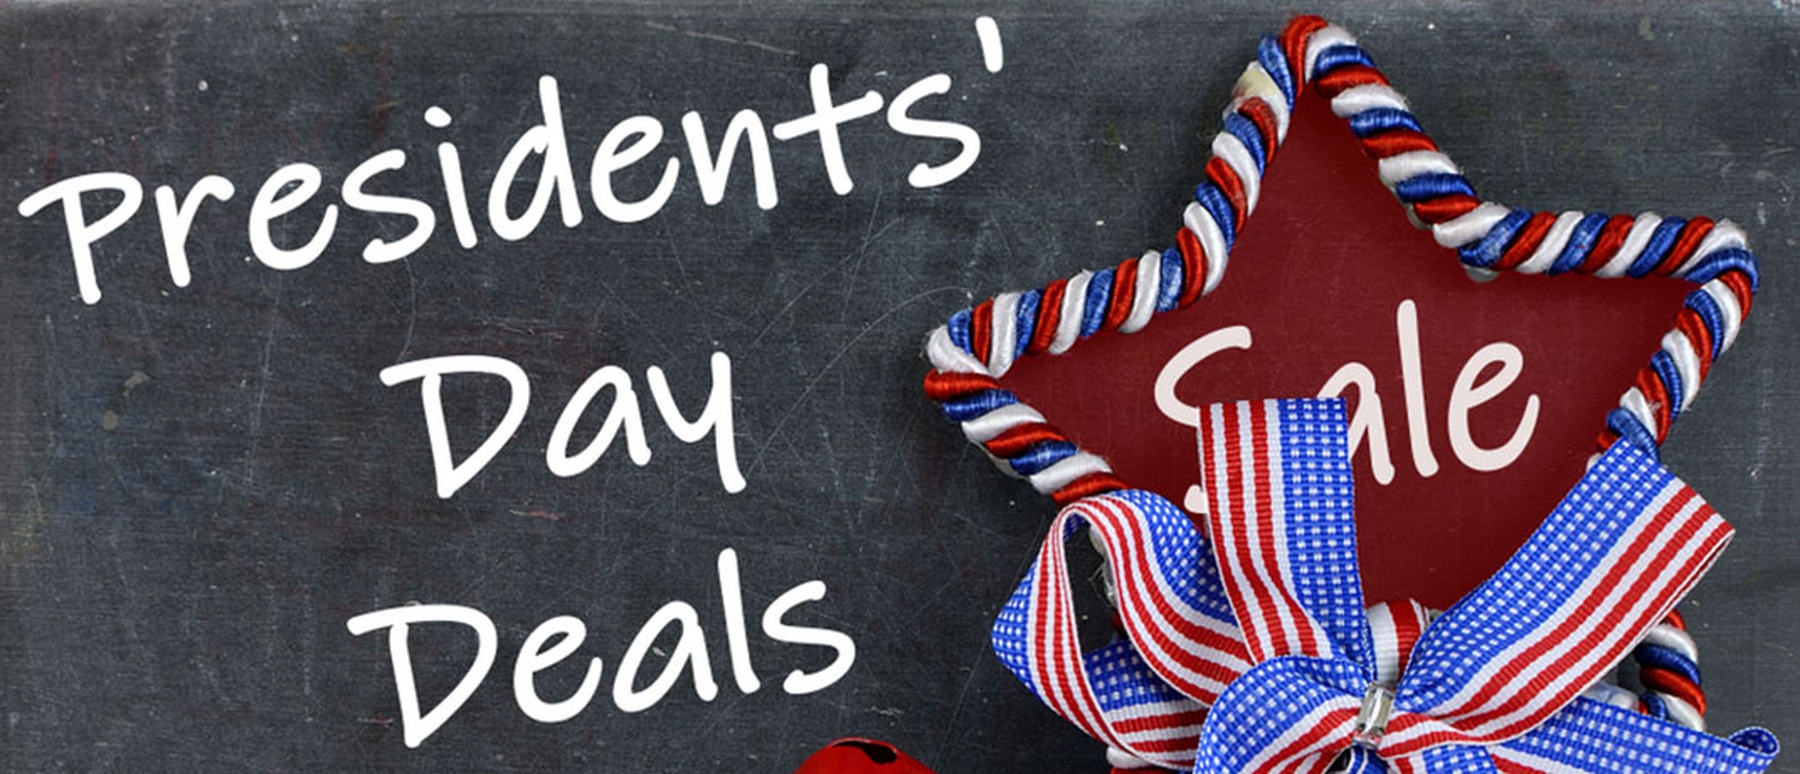 Presidents' Day Deals text with red, white, and blue star